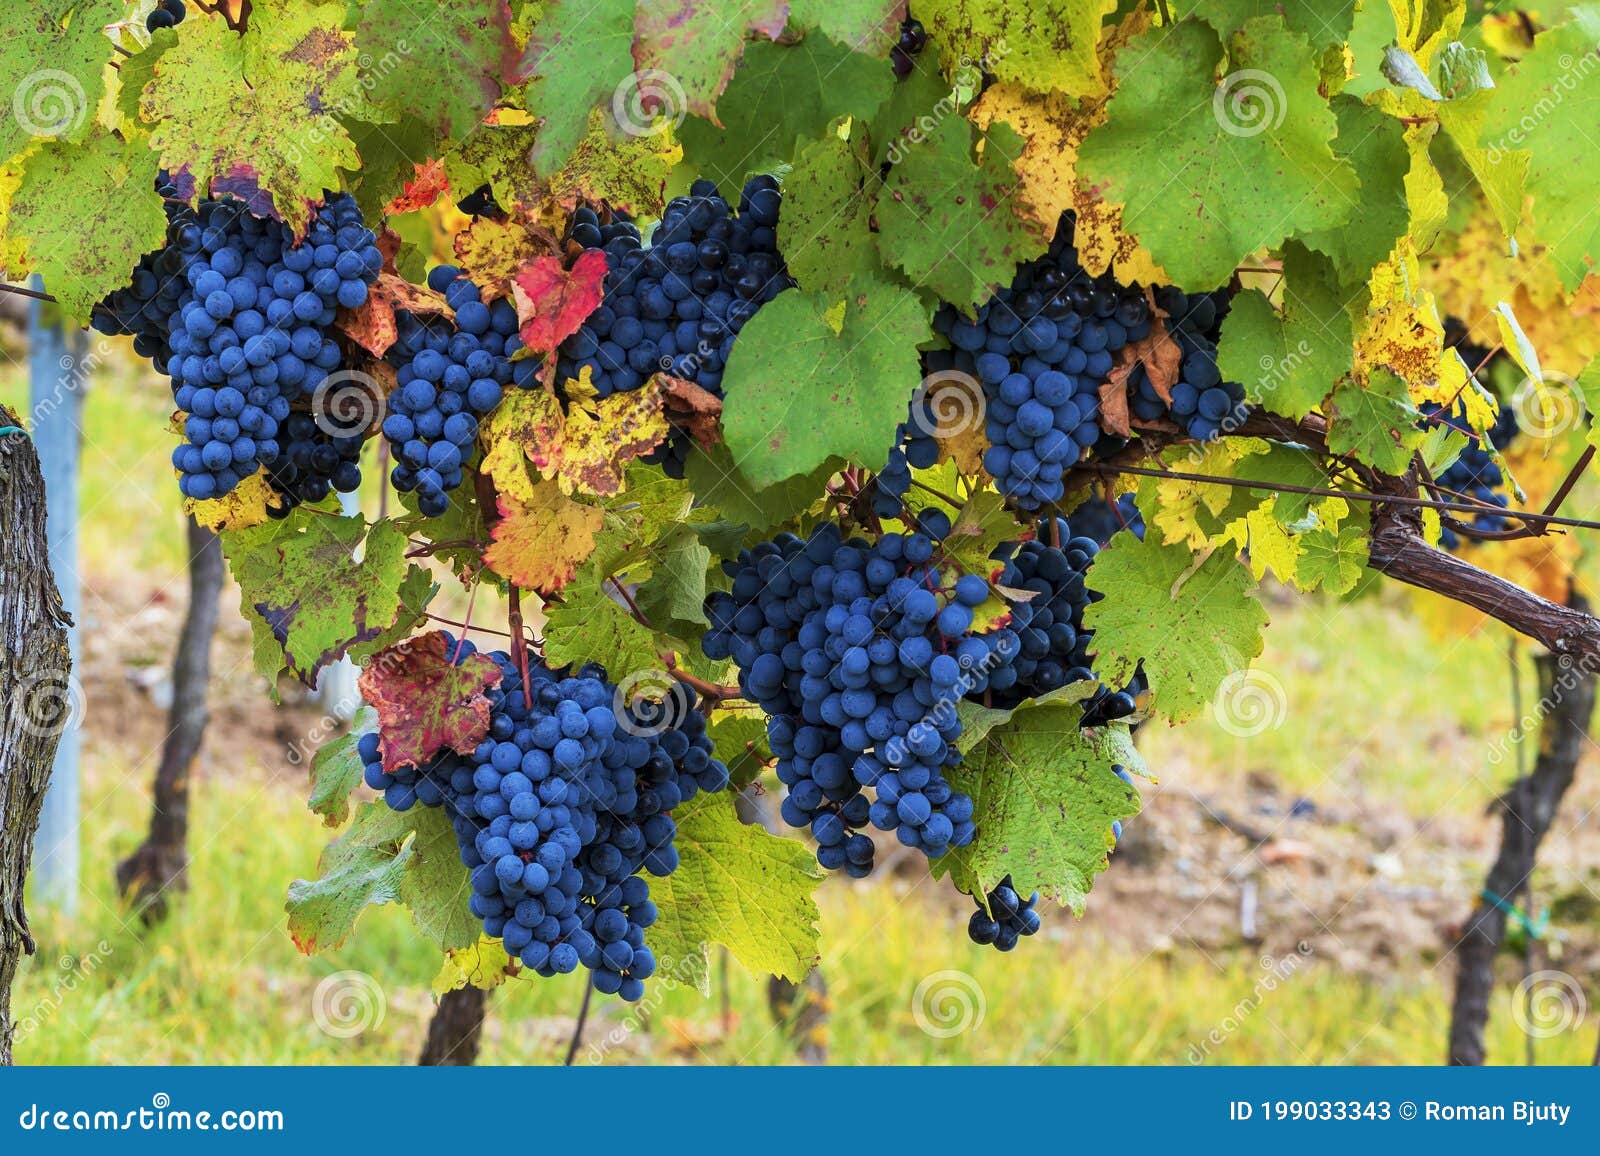 blue bunches of grapes hanging in a vineyard in the setting sun. the wine is ripe for harvest